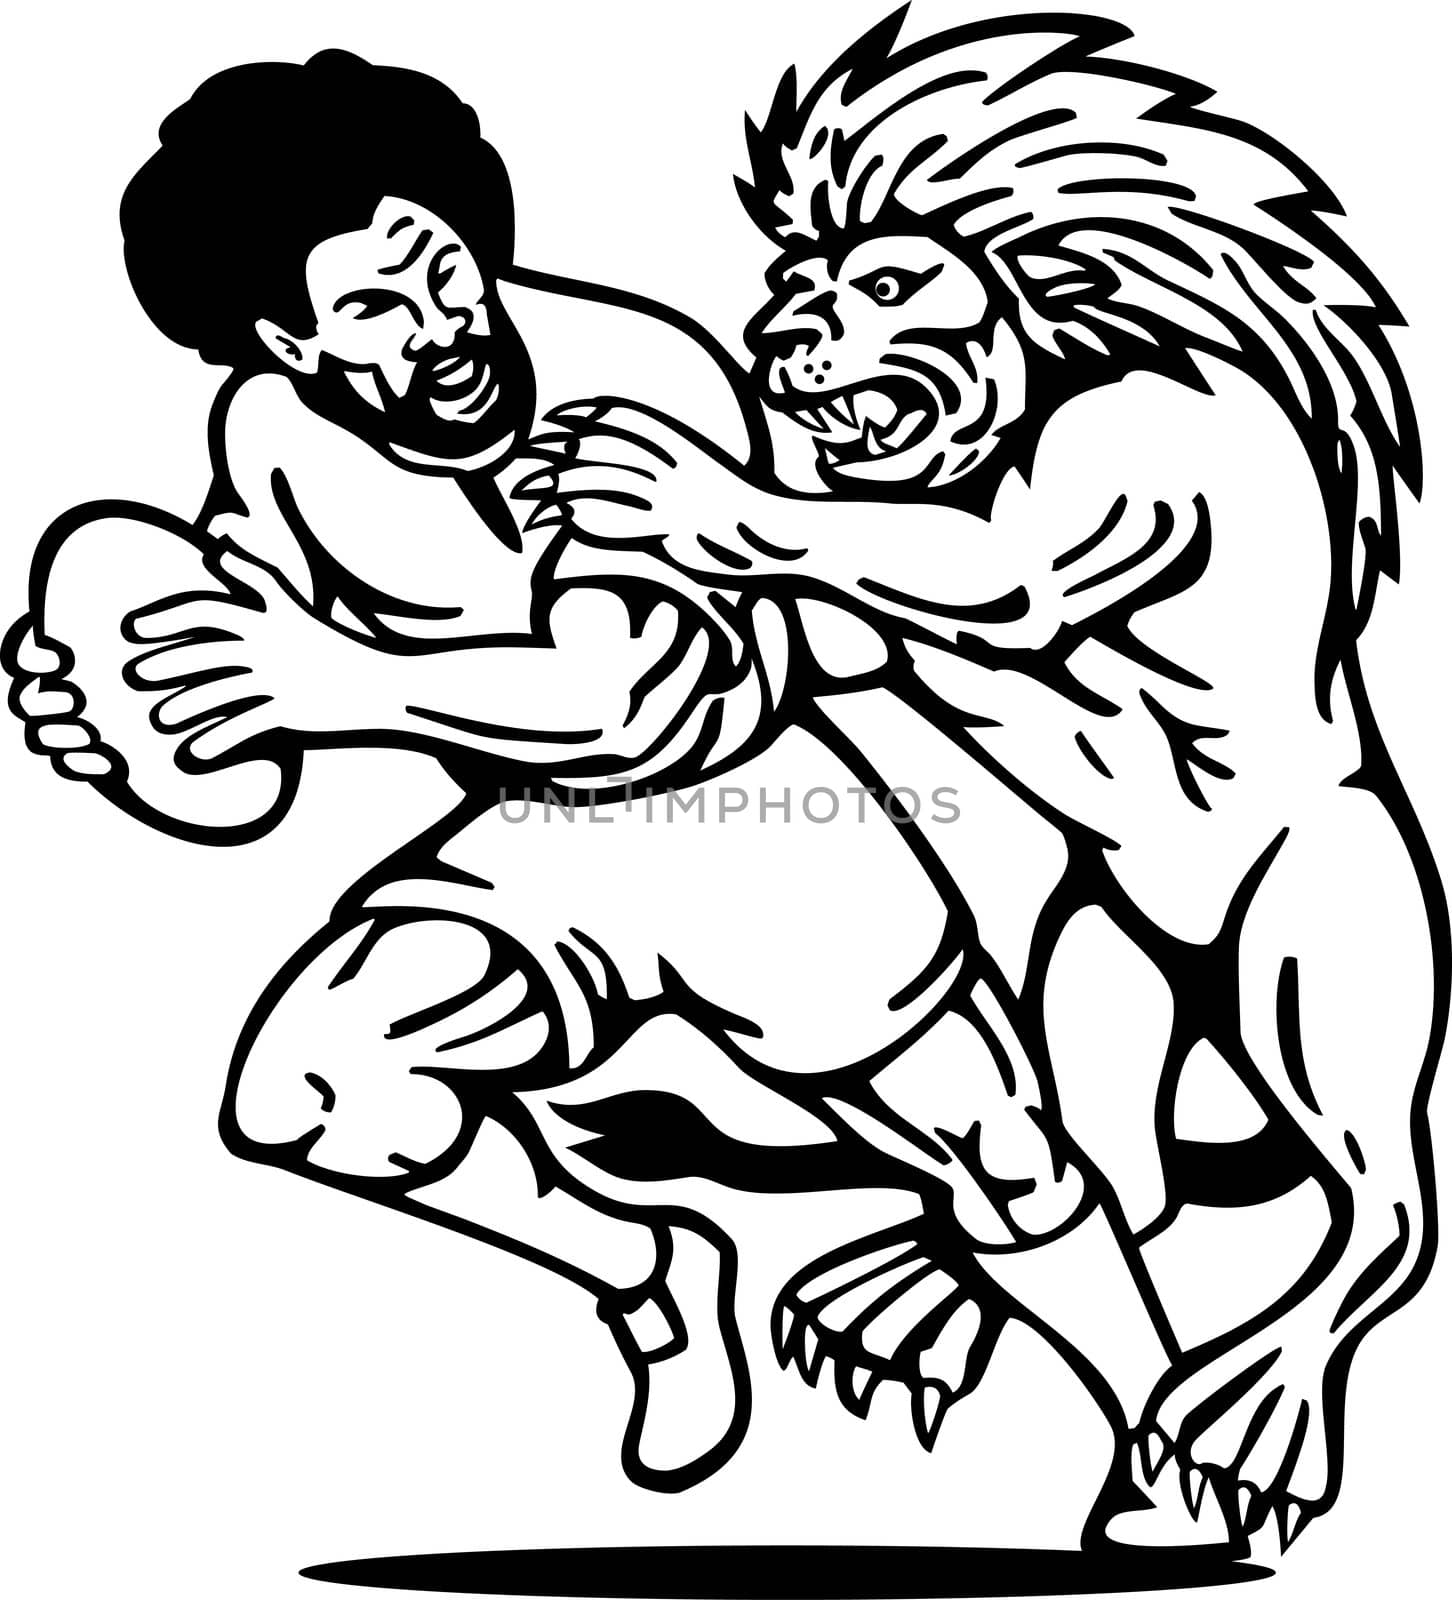 illustration of  a Rugby player running with ball attack by lion done in black and white